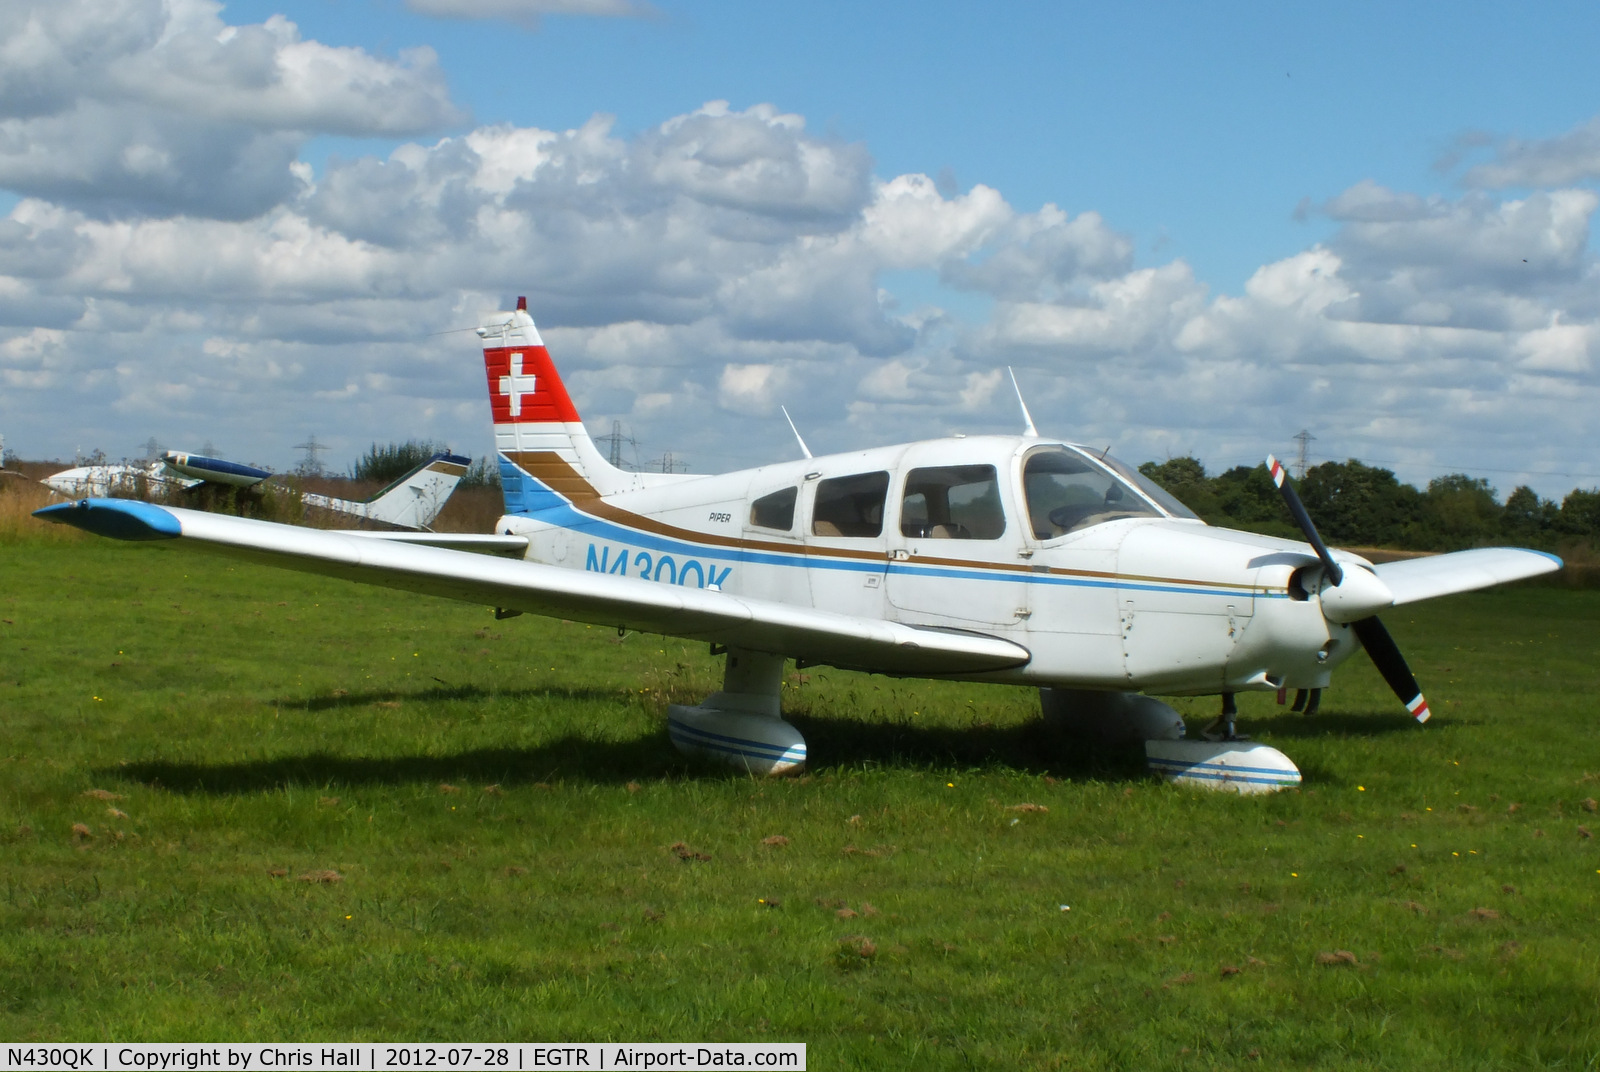 N430QK, 1978 Piper PA-28-161 Warrior II C/N 28-7816495, privately owned